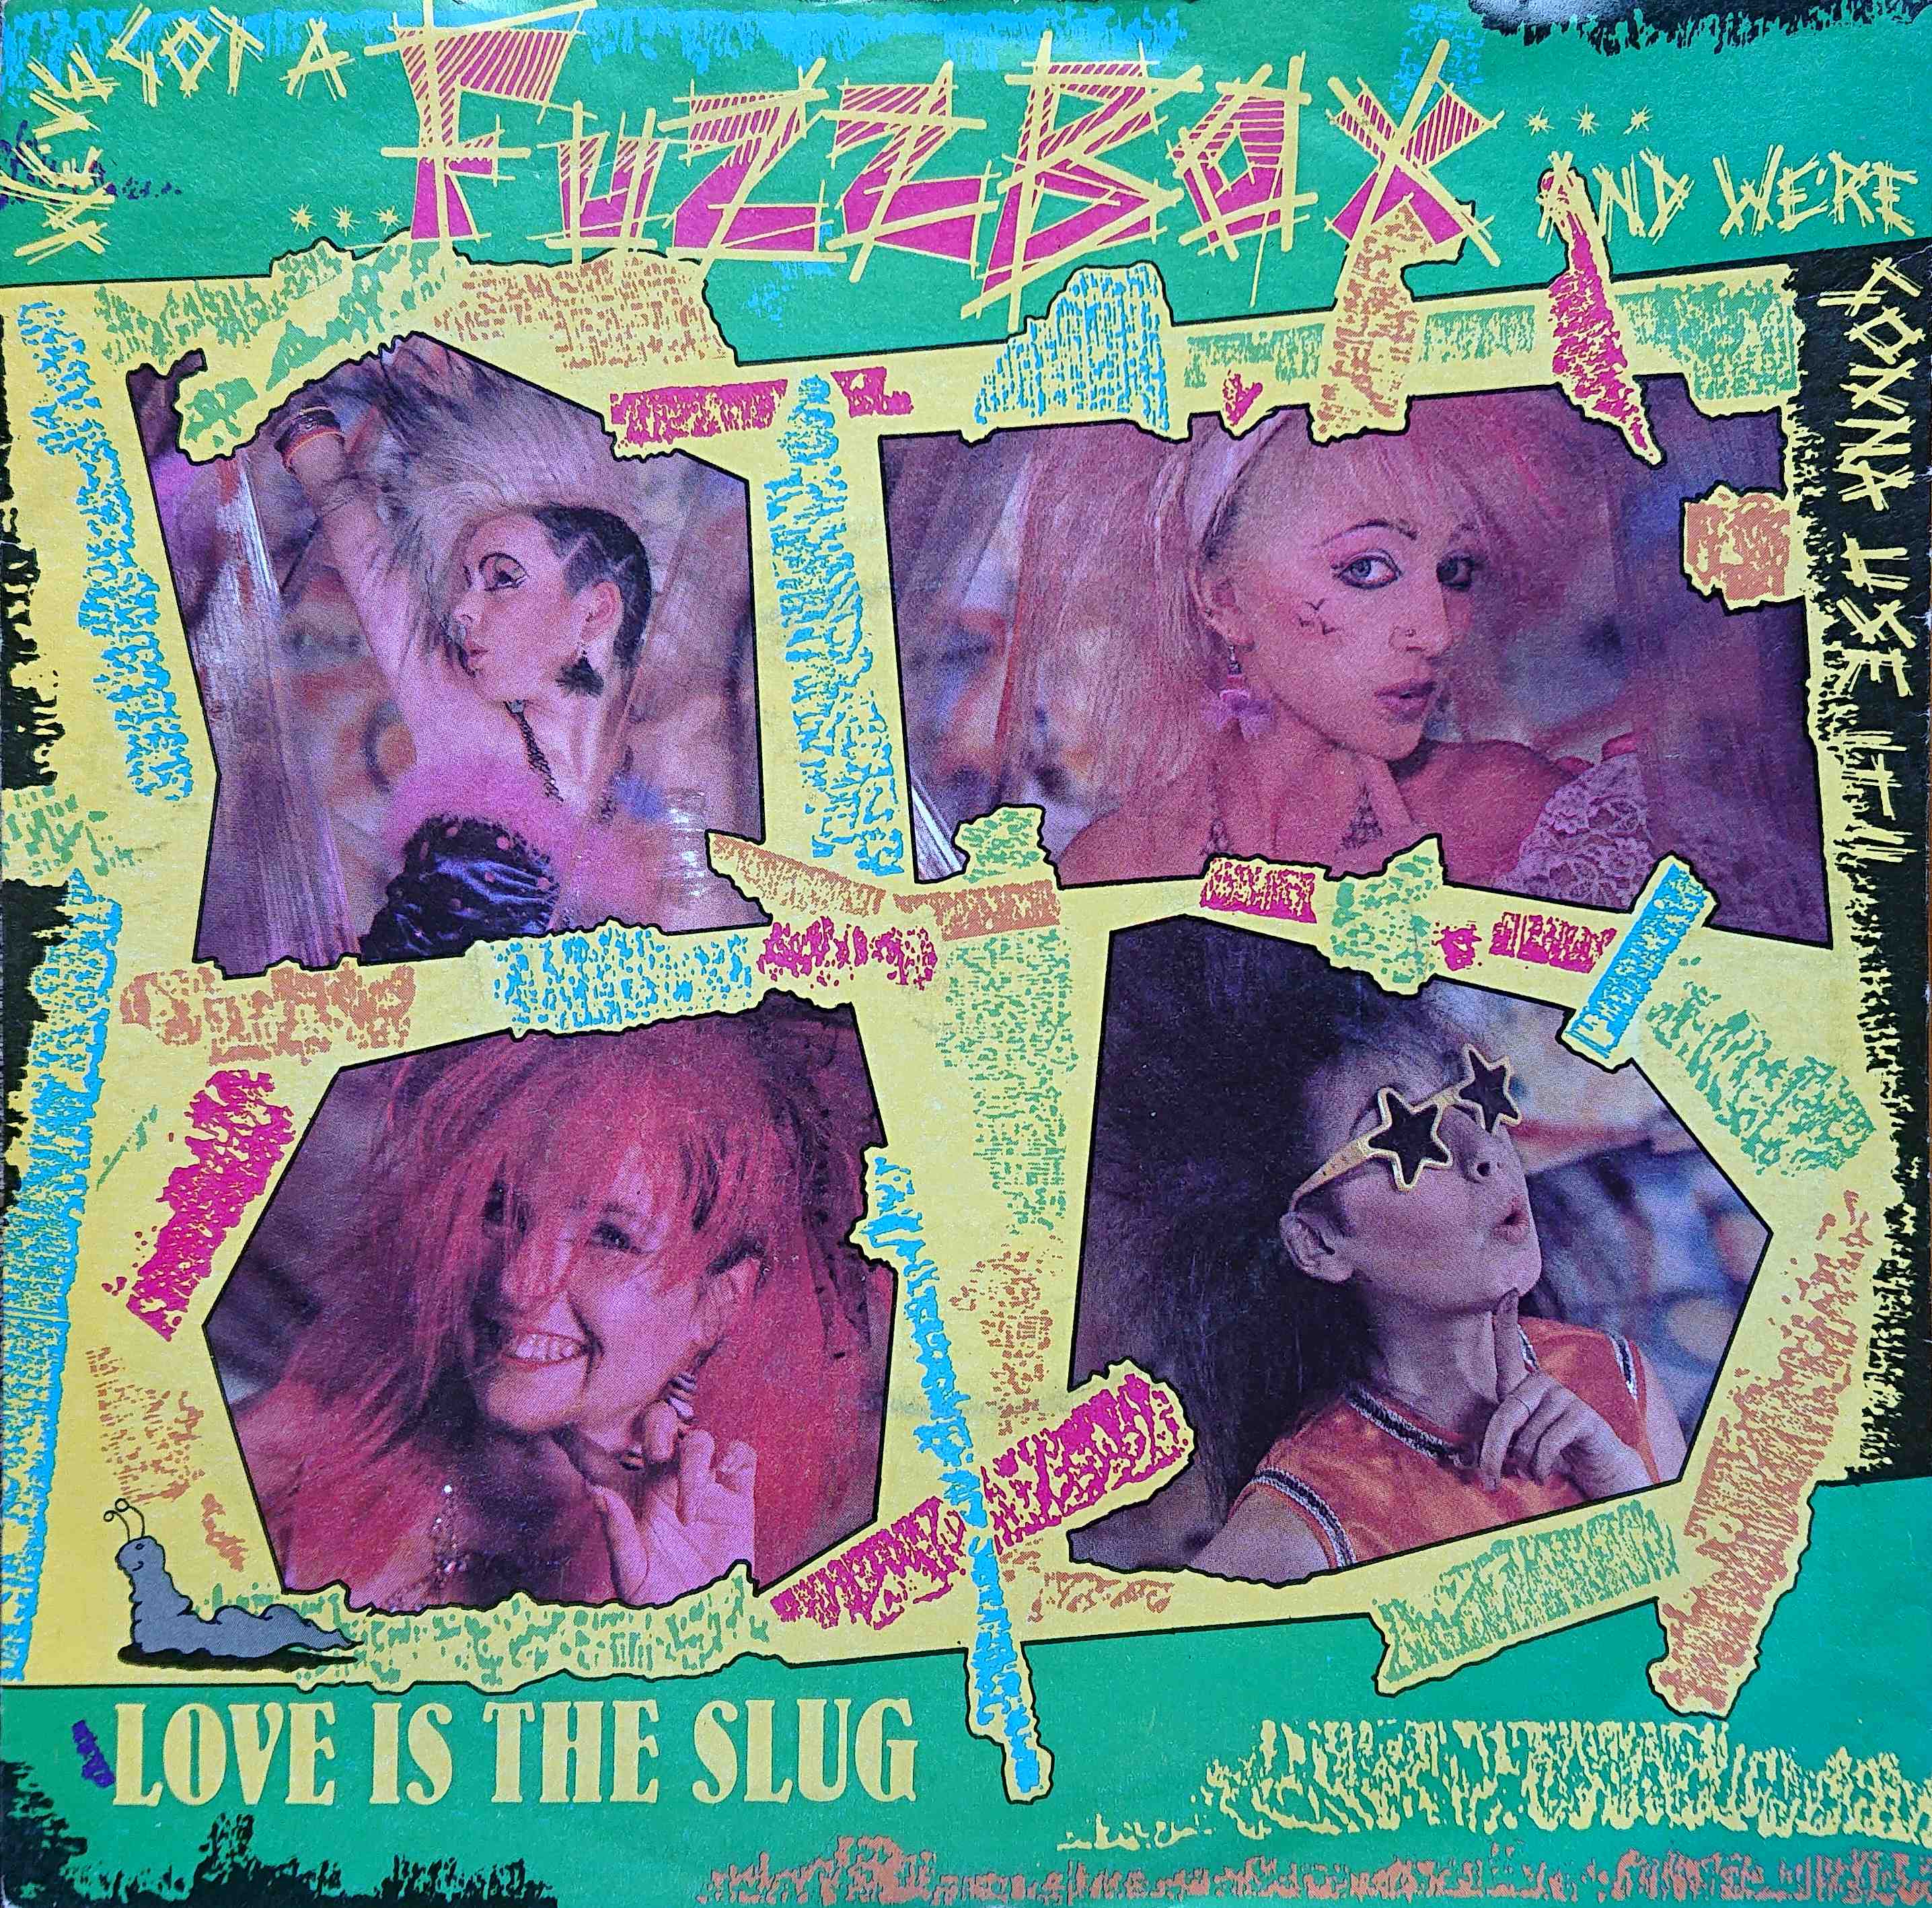 Picture of Love is a slug by artist Fuzzbox 